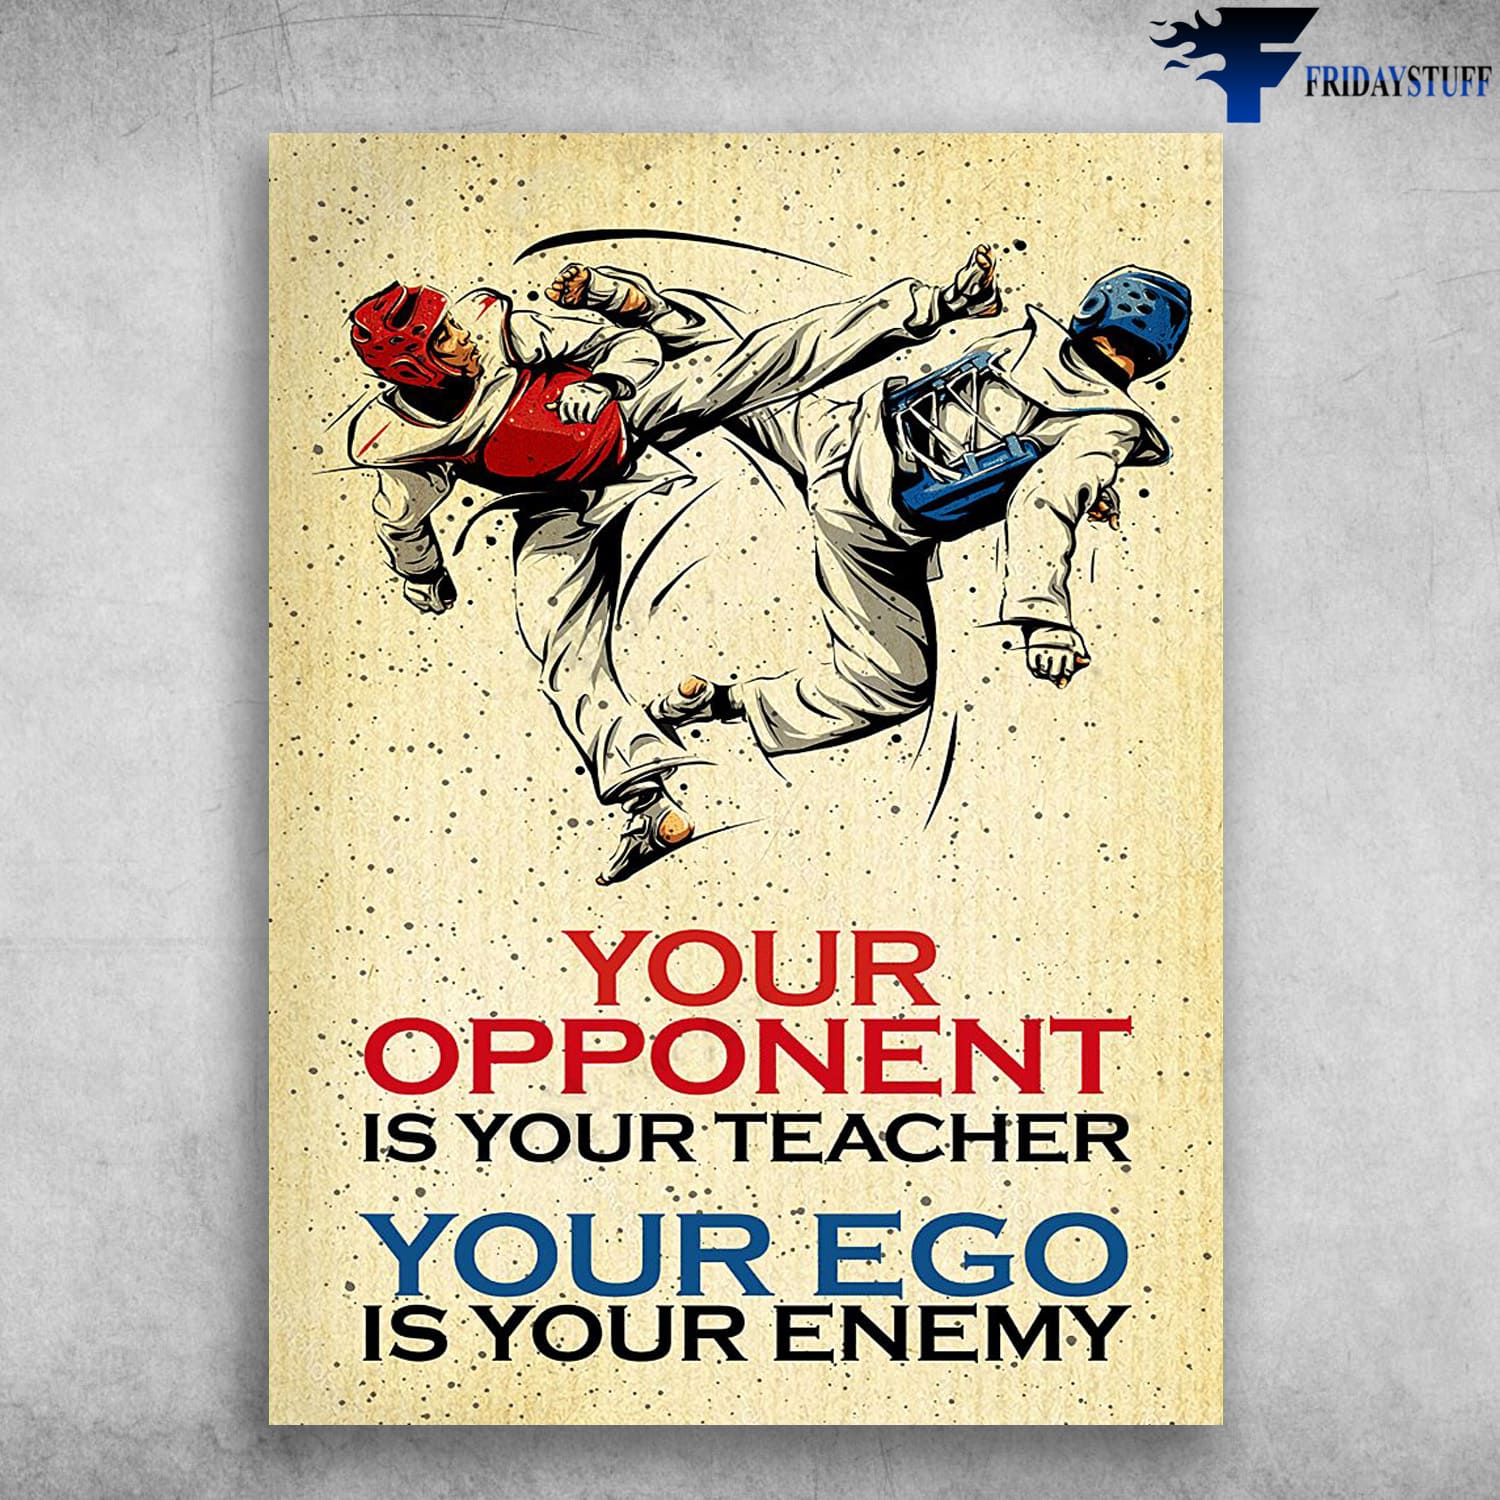 Taekwondo Poster, Taekwondo Training, Your Opponent Is Your Teacher, Your Ego Is Your Enemy